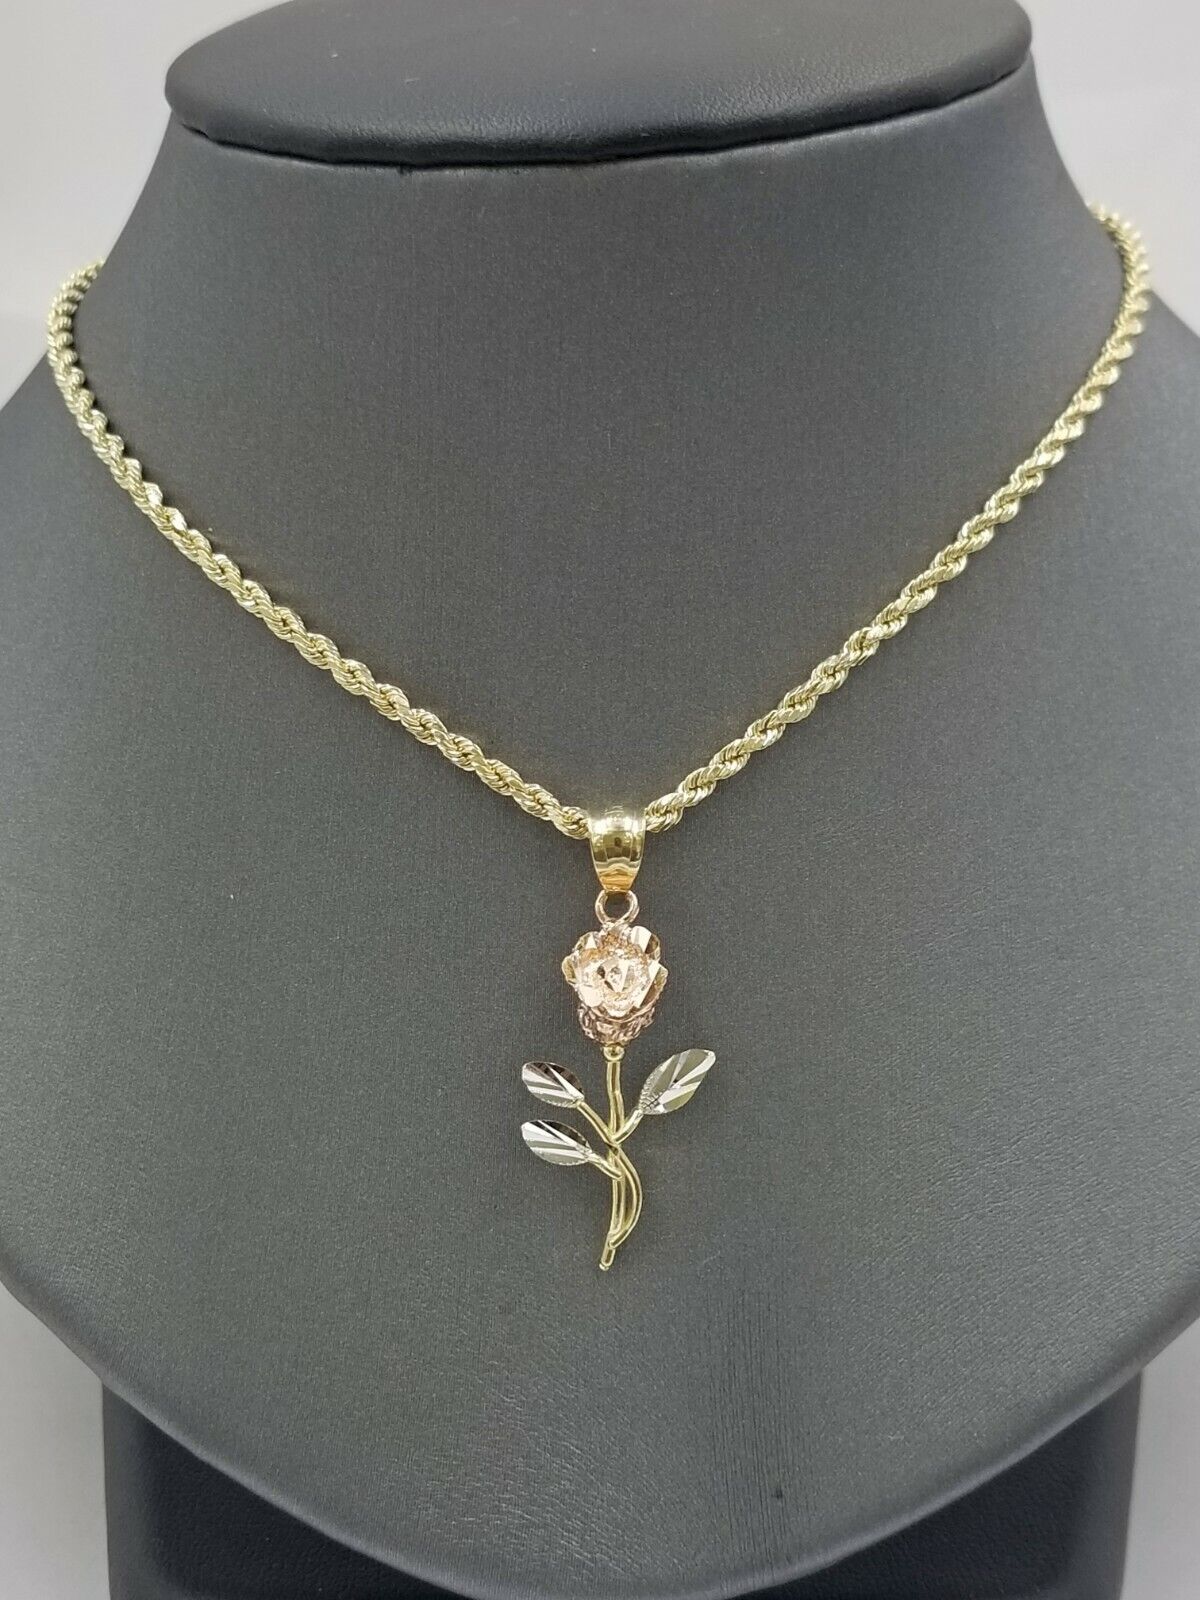 10k Trio Gold Rose Flower Charm Rope Chain Pendant 2.5mm 18 20 22 24 26 28 Inch